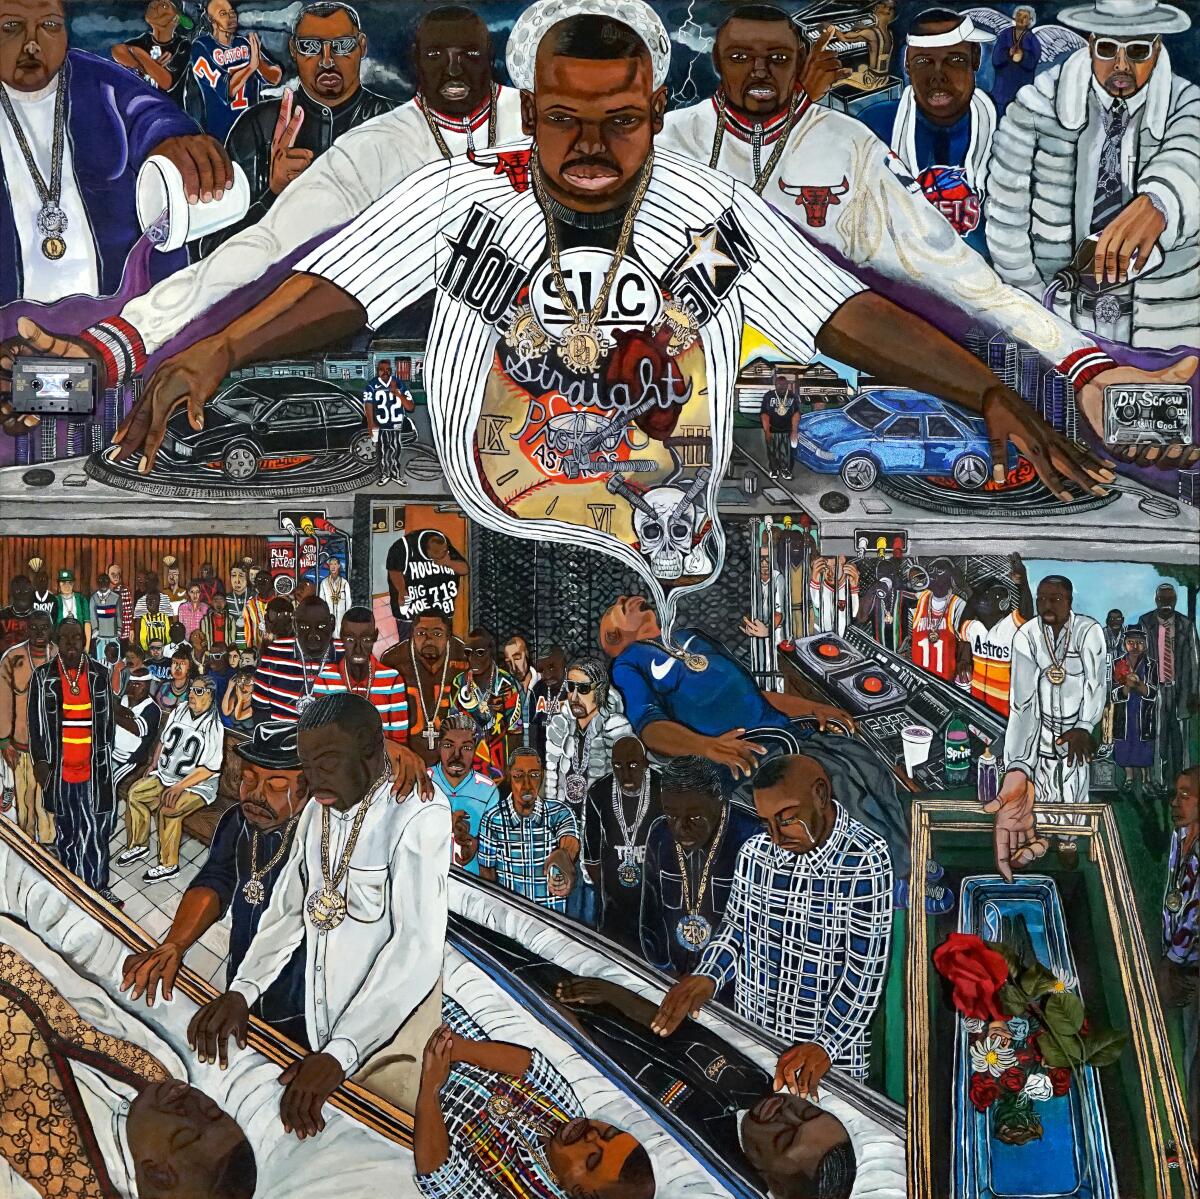 A painting shows the figure of a Black man hovering over various scenes, including a funeral